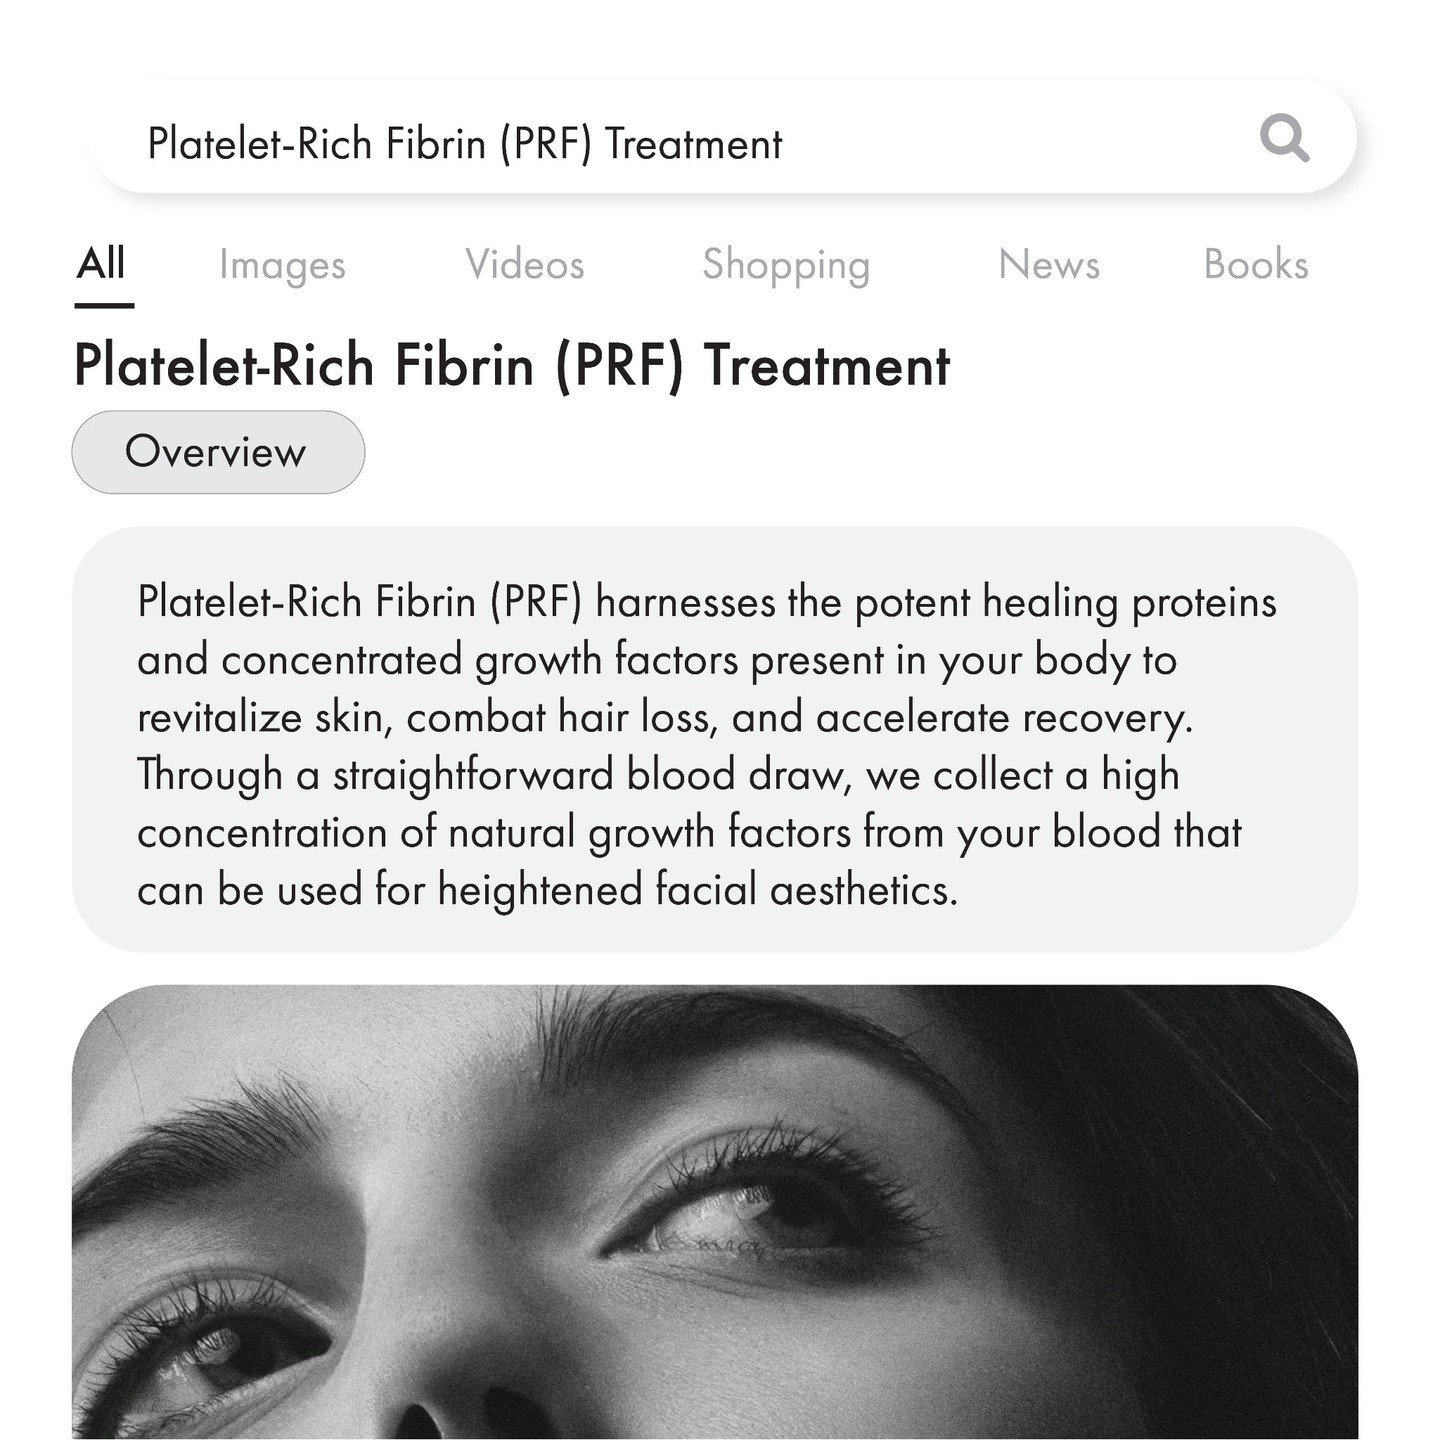 Unlock the secret to rejuvenated skin and luscious locks with Platelet-Rich Fibrin (PRF) Treatment. Say goodbye to hair loss and hello to radiant skin through the magic of your body's own healing proteins and growth factors. It's all about enhancing 